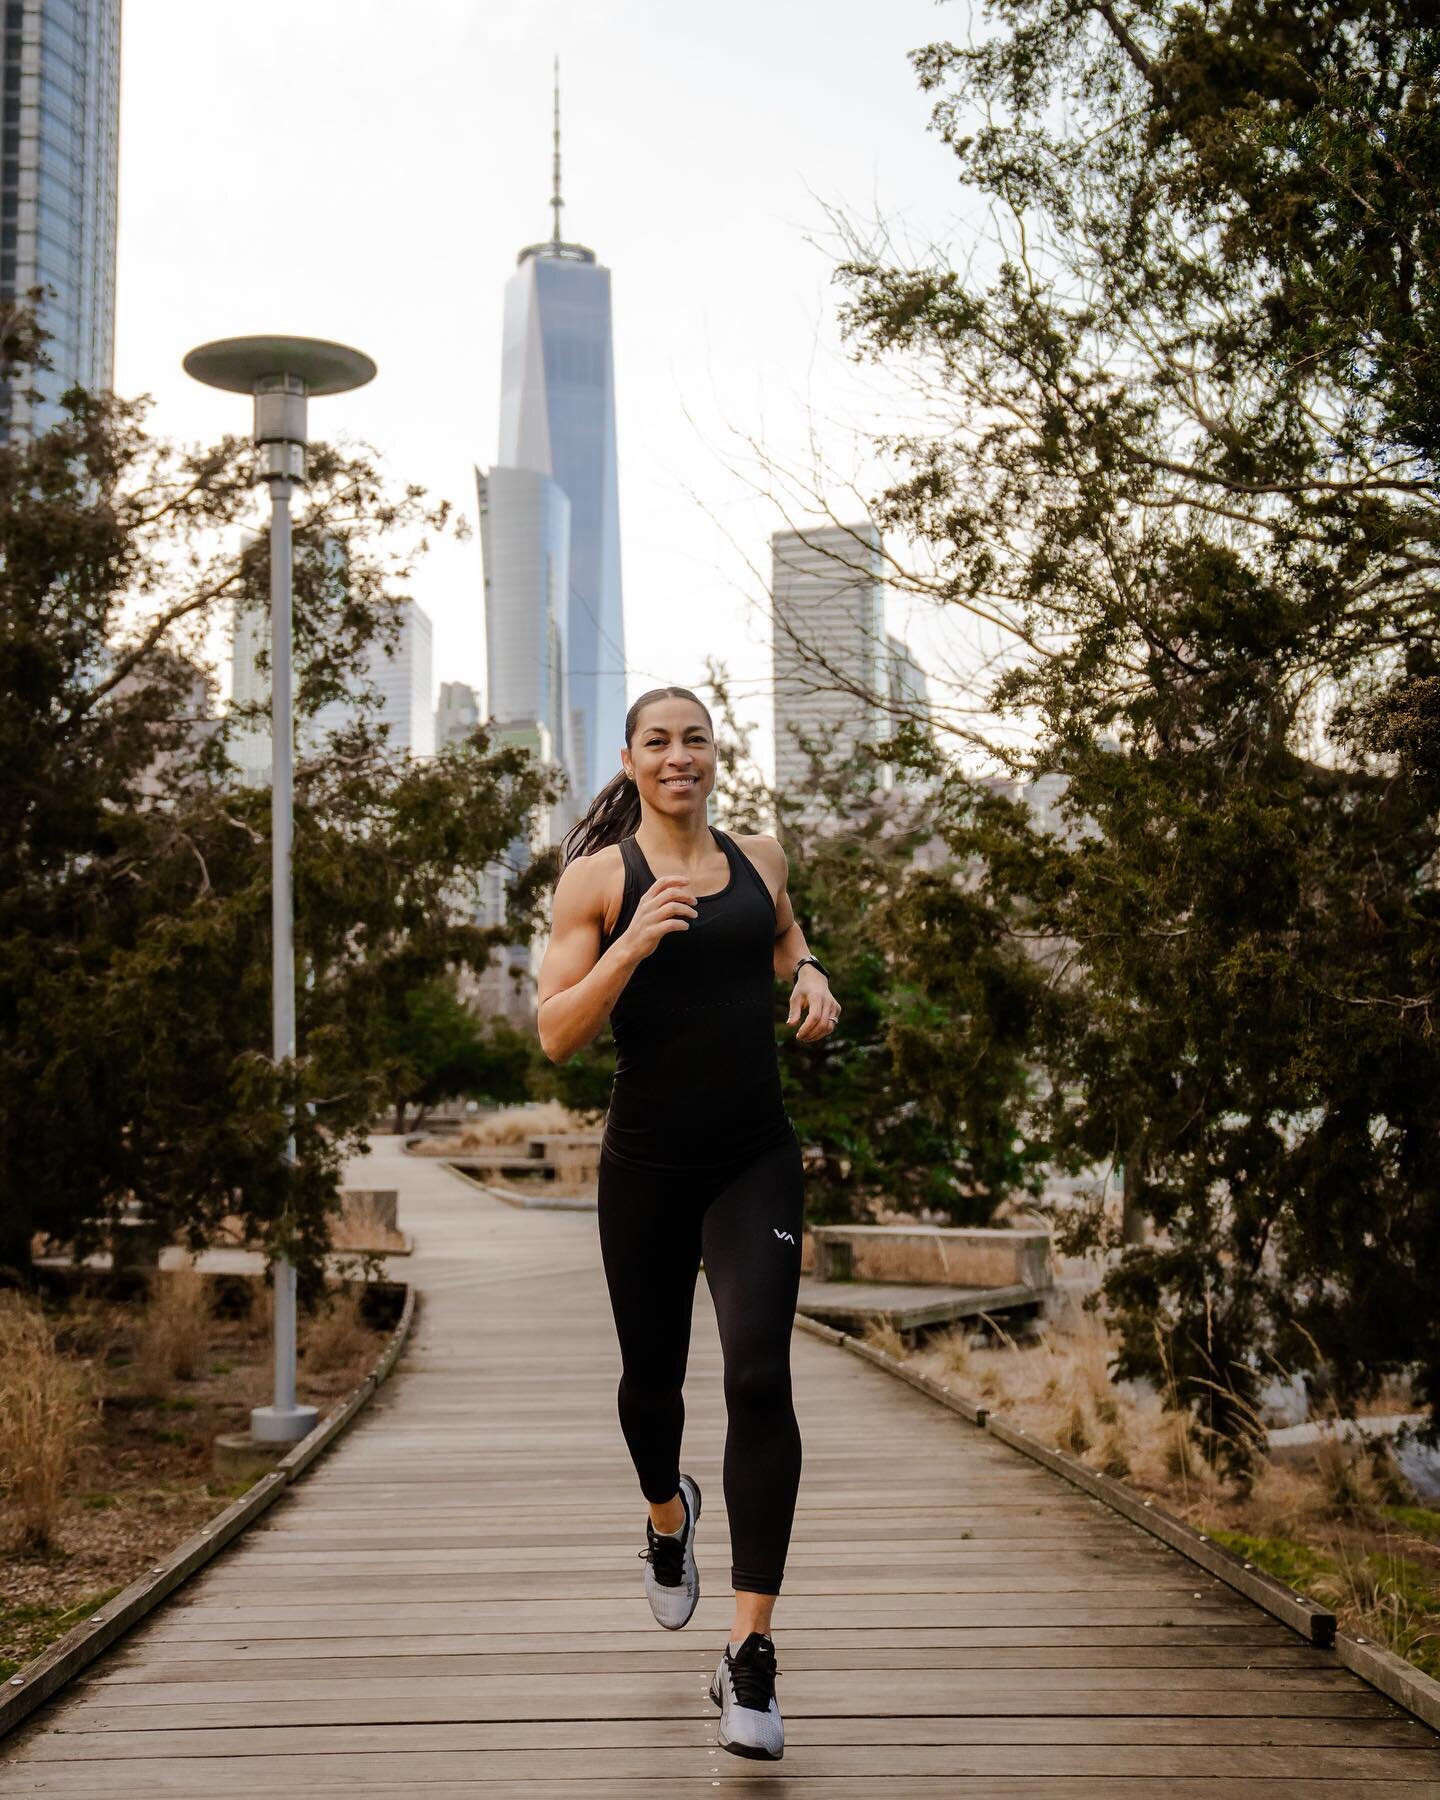 A little rain can&rsquo;t keep me from my Friday run. Lace up your shoes and get some fresh air. Start today! 
.
📸 @kingcurated 👊🏽 
.
#JustDoIt #CantStopWontStop #NYC #healthy #lifestyle